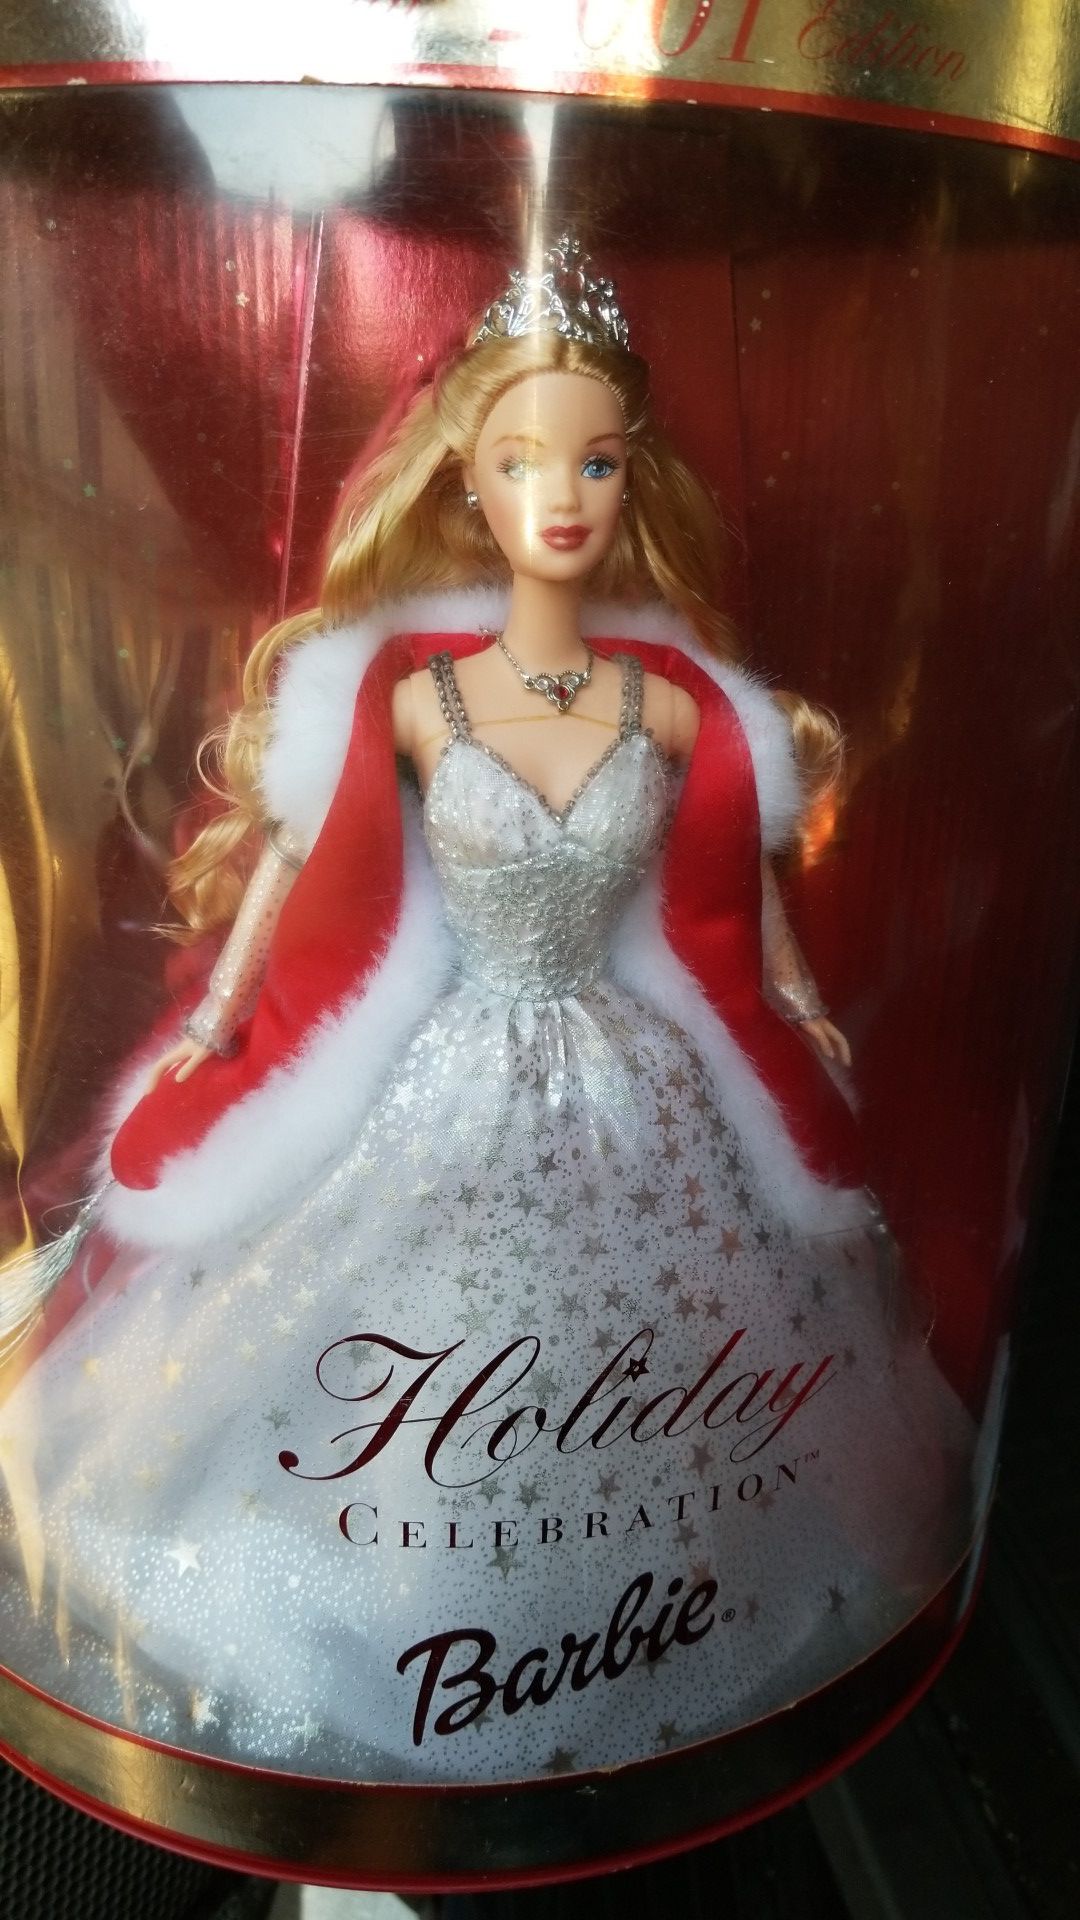 2001 Holiday barbie doll